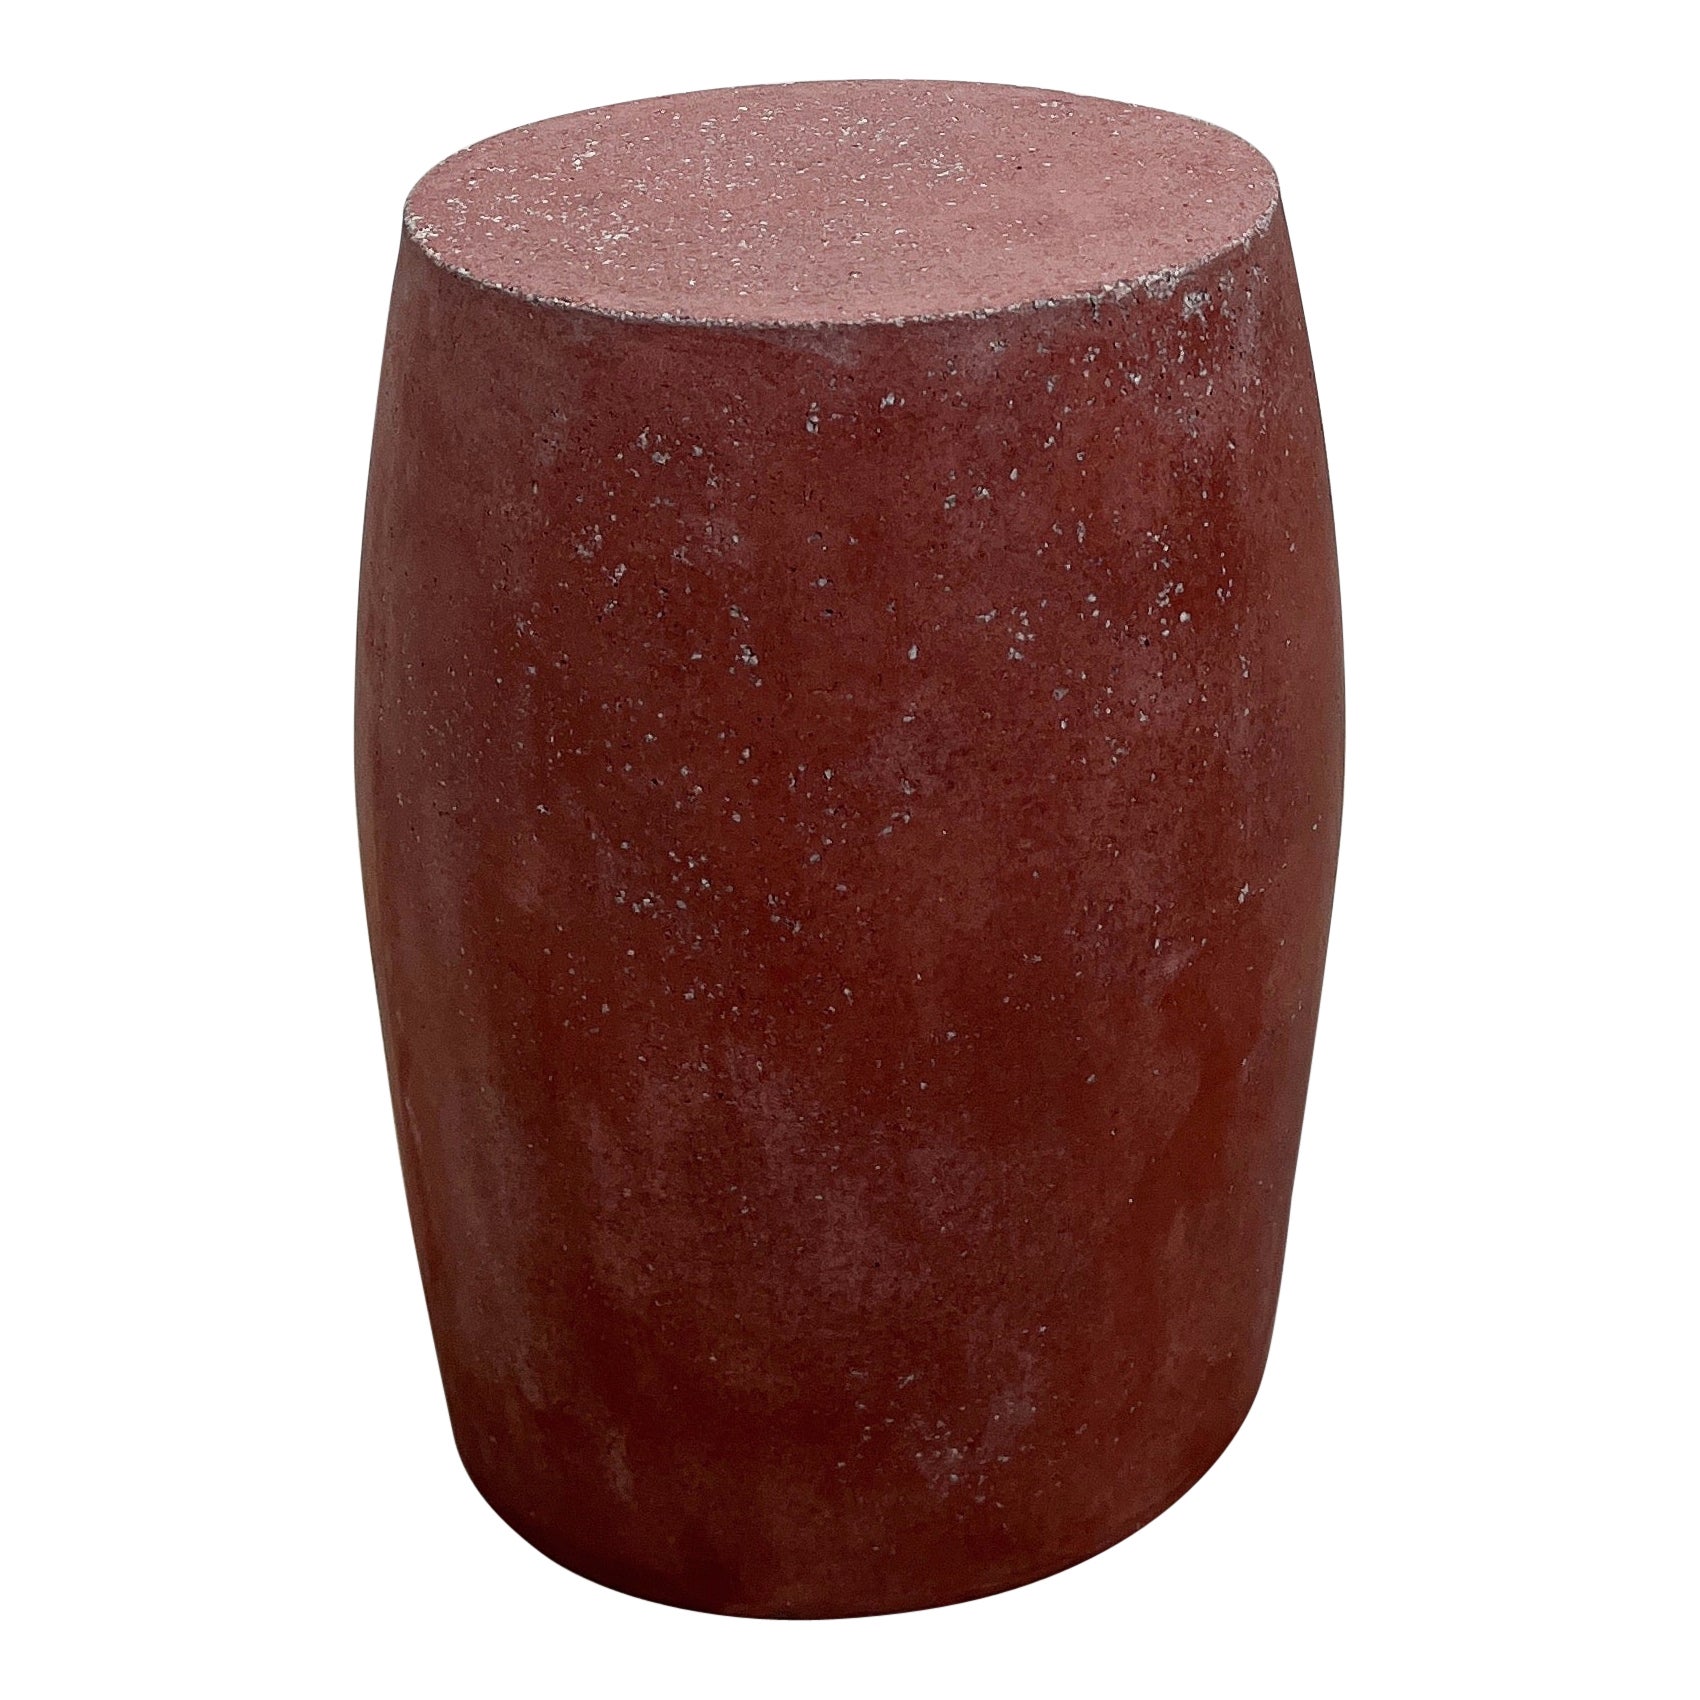 Cast Resin 'Barrel' Side Table, Sedona Red Finish by Zachary A. Design